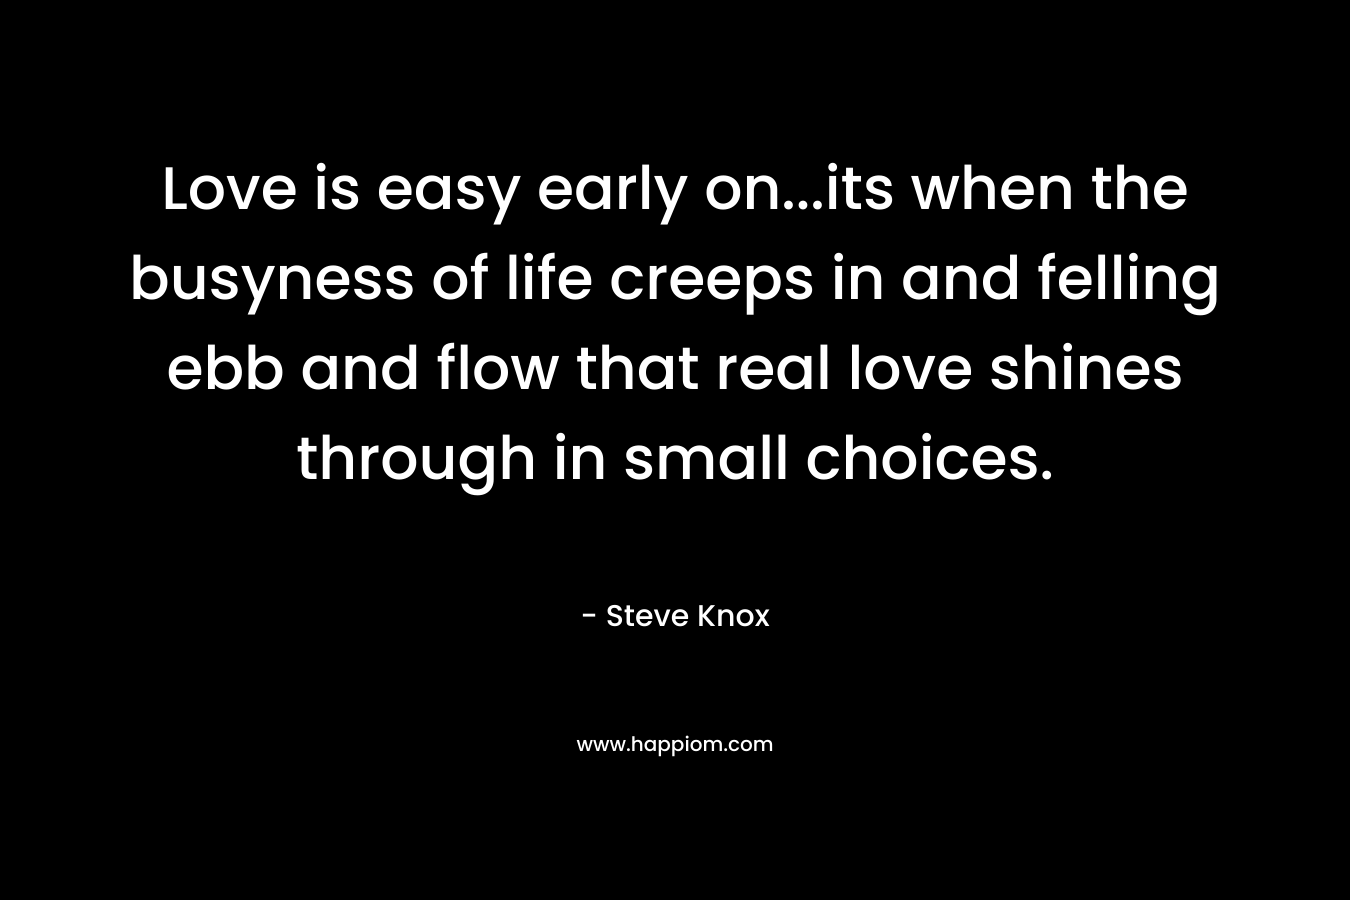 Love is easy early on…its when the busyness of life creeps in and felling ebb and flow that real love shines through in small choices. – Steve Knox